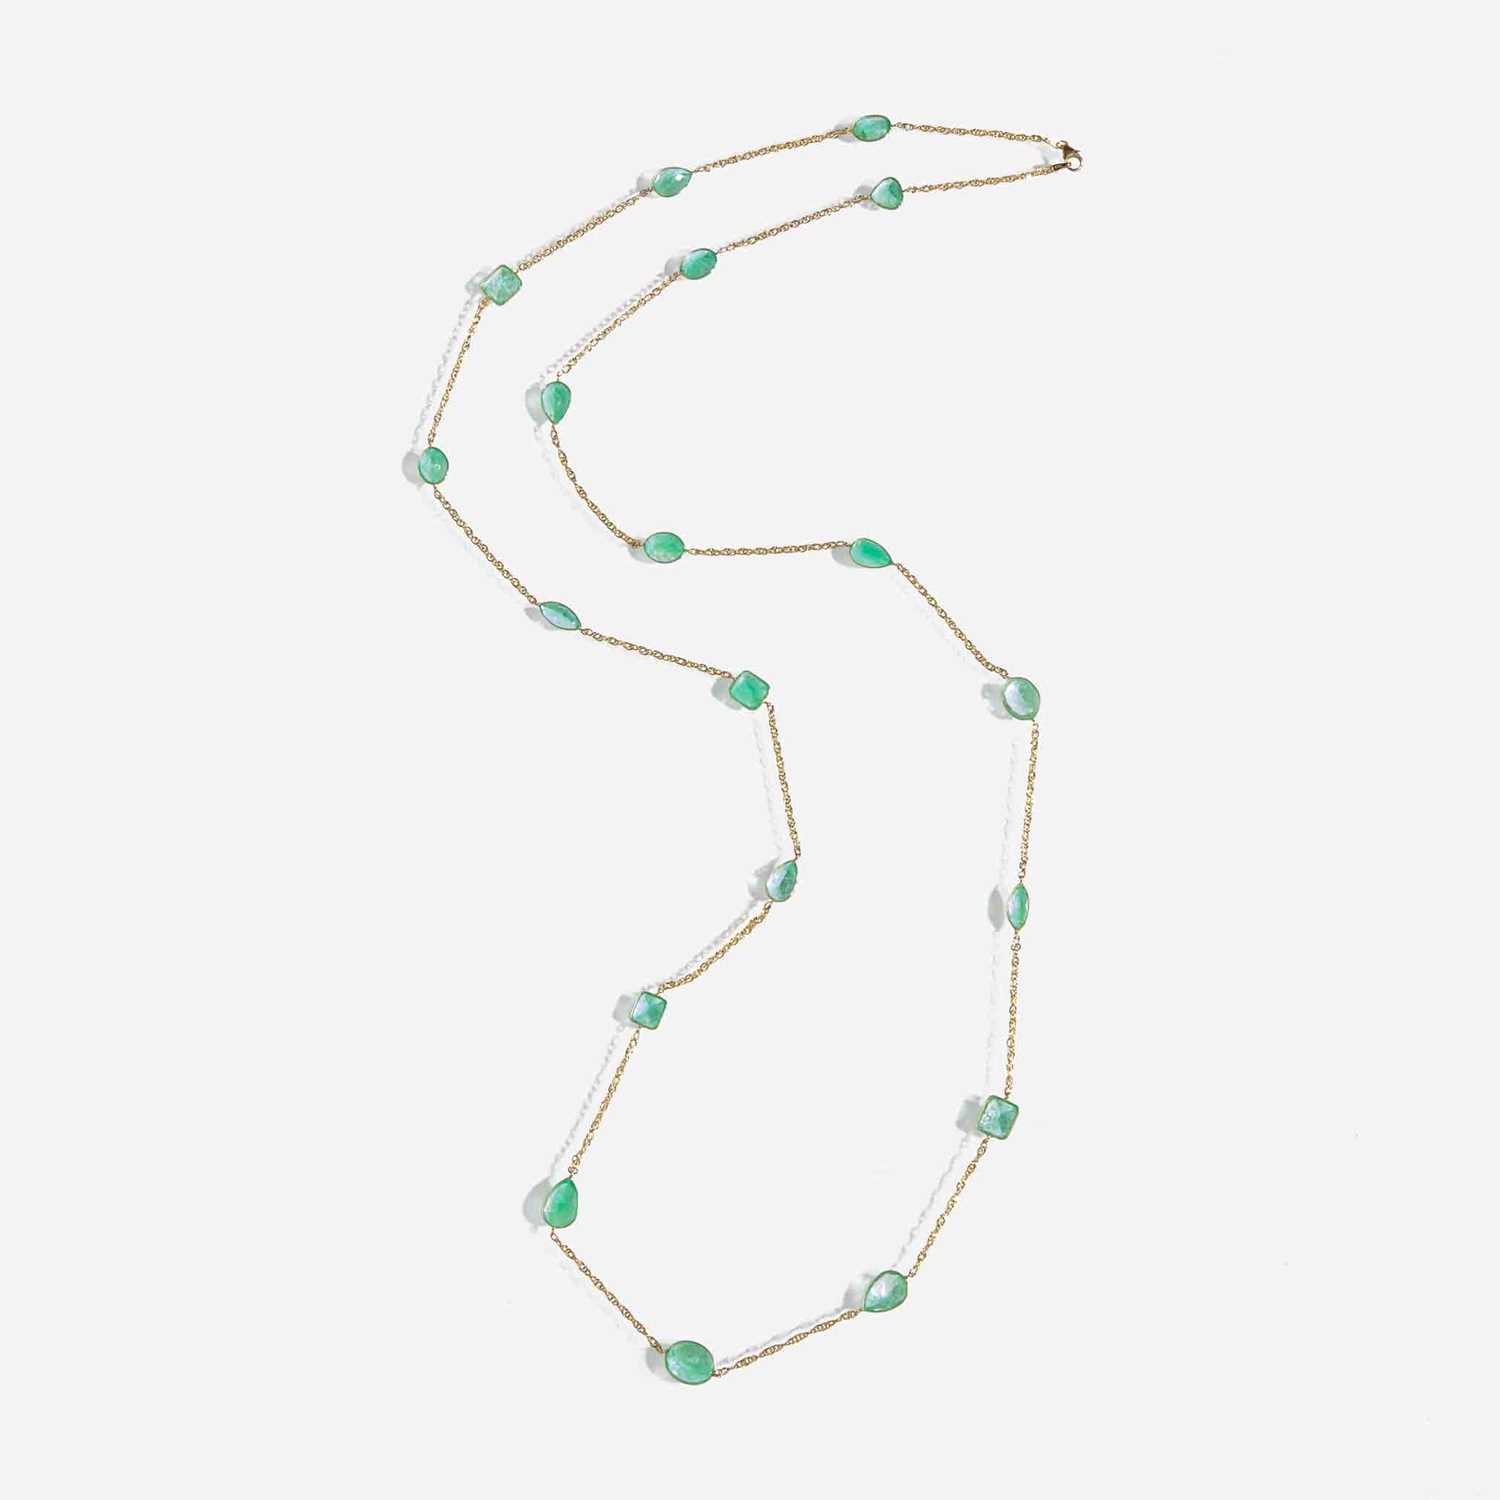 Lot 284 - An 18K Yellow Gold and Emerald Necklace